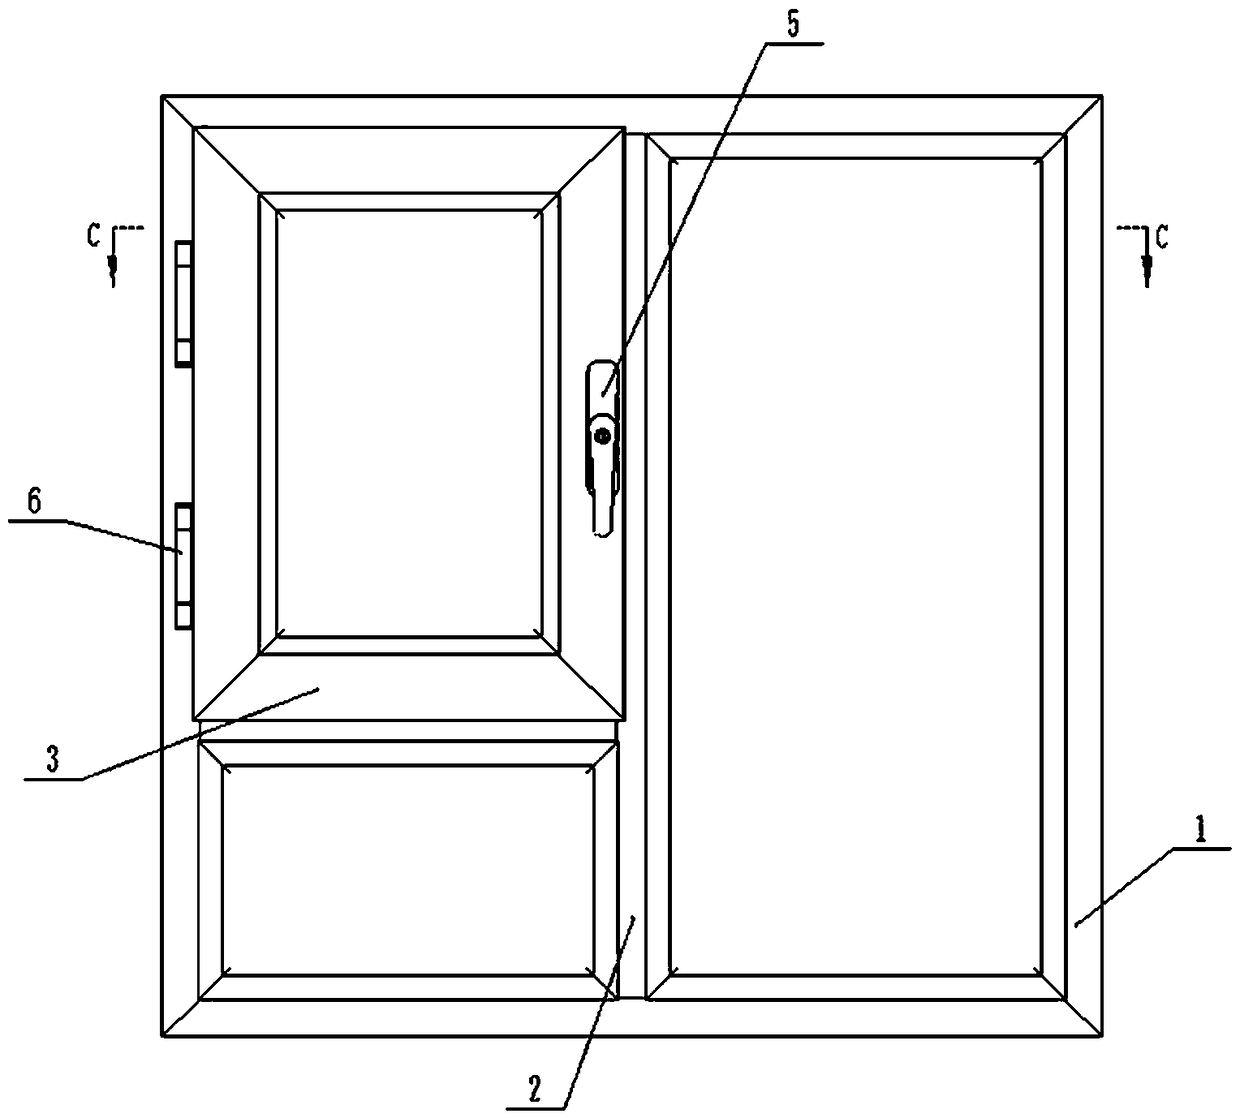 A multifunctional steel door and window system and a method for making window frames and sash frames in the system